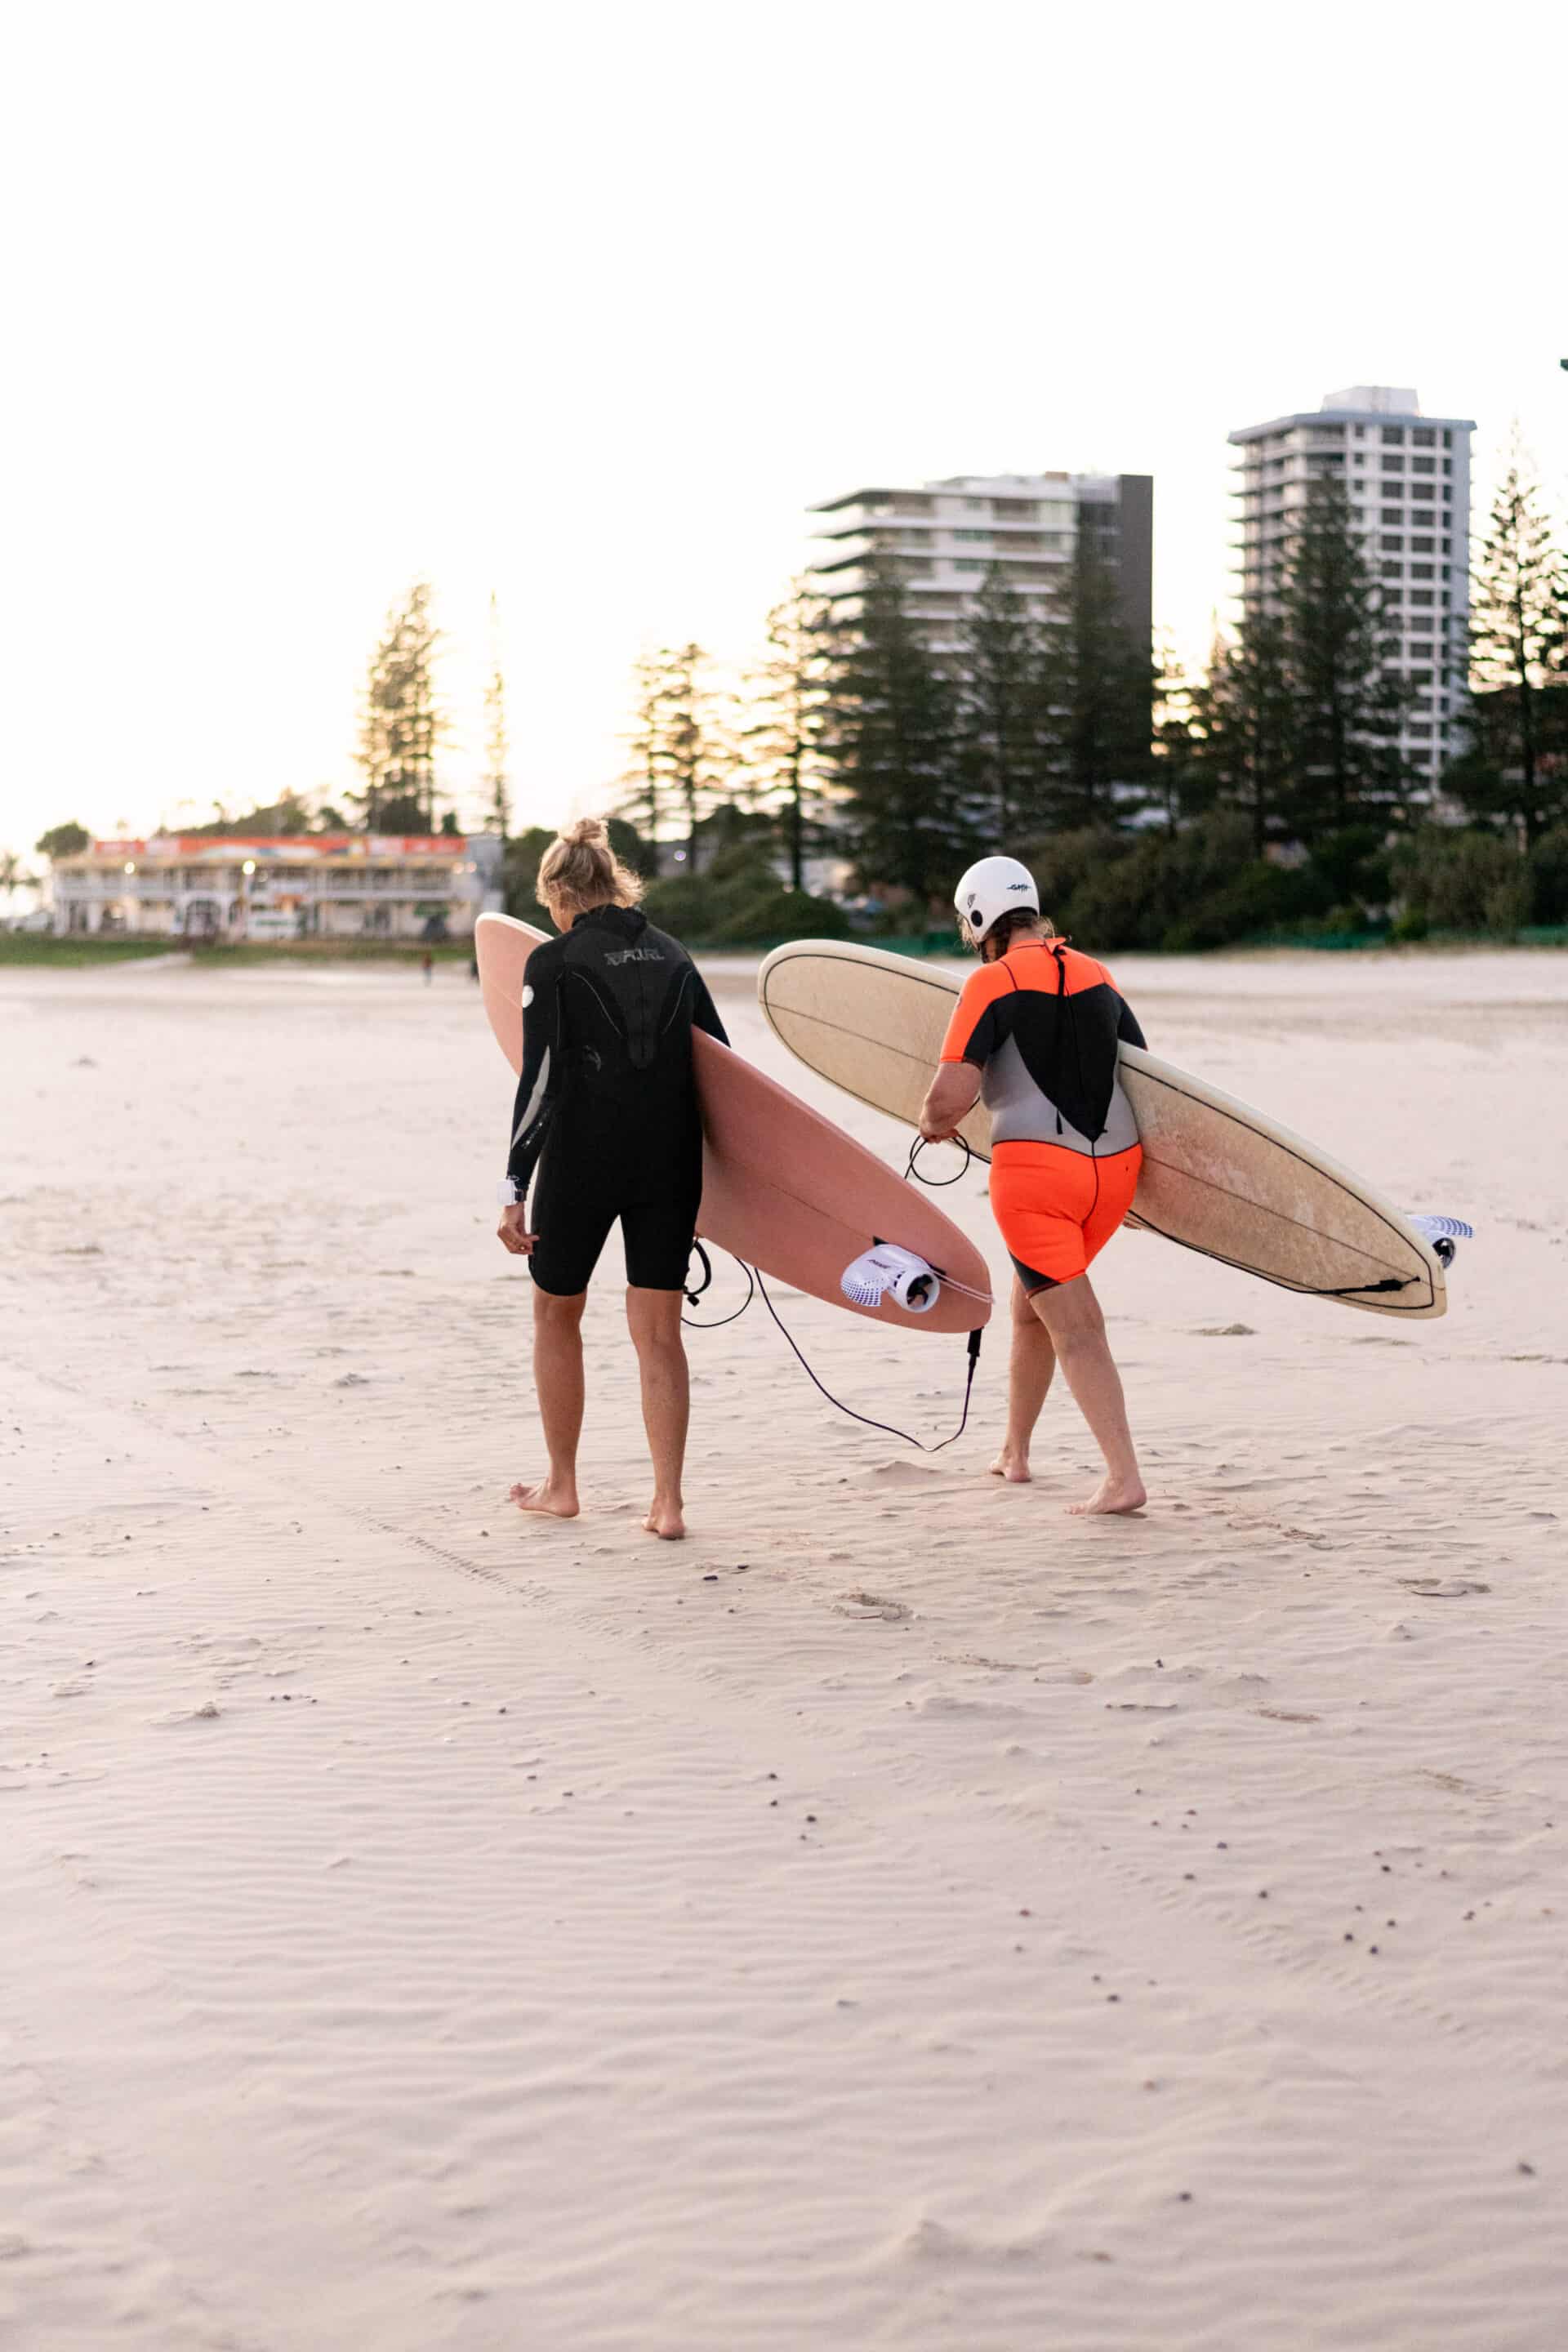 2 people standing on beach with surfboards in arms, wearing wetsuits